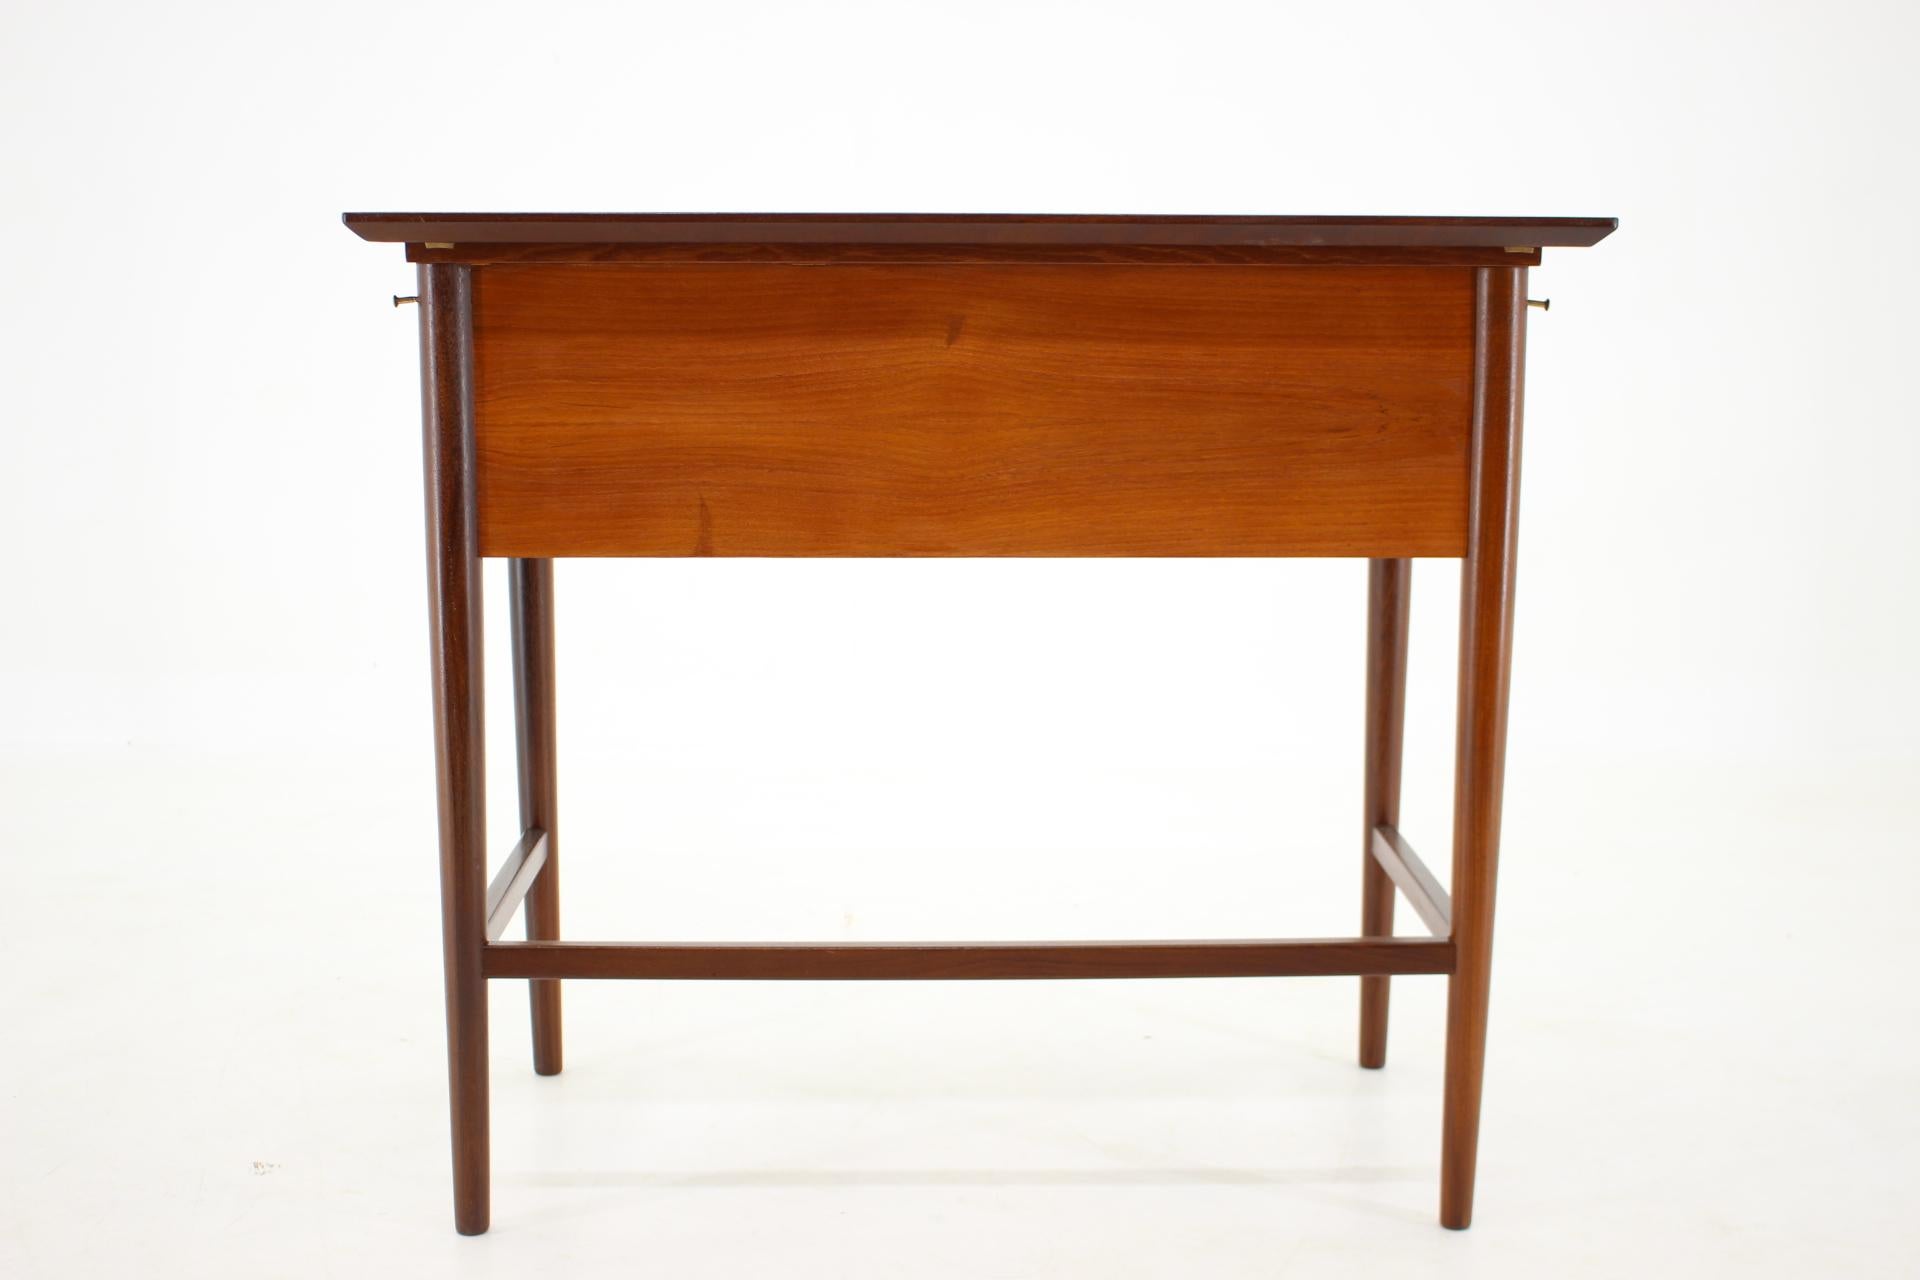 1960s Teak Sewing Table or Table with Built in Sewing Machine, Denmark For Sale 4